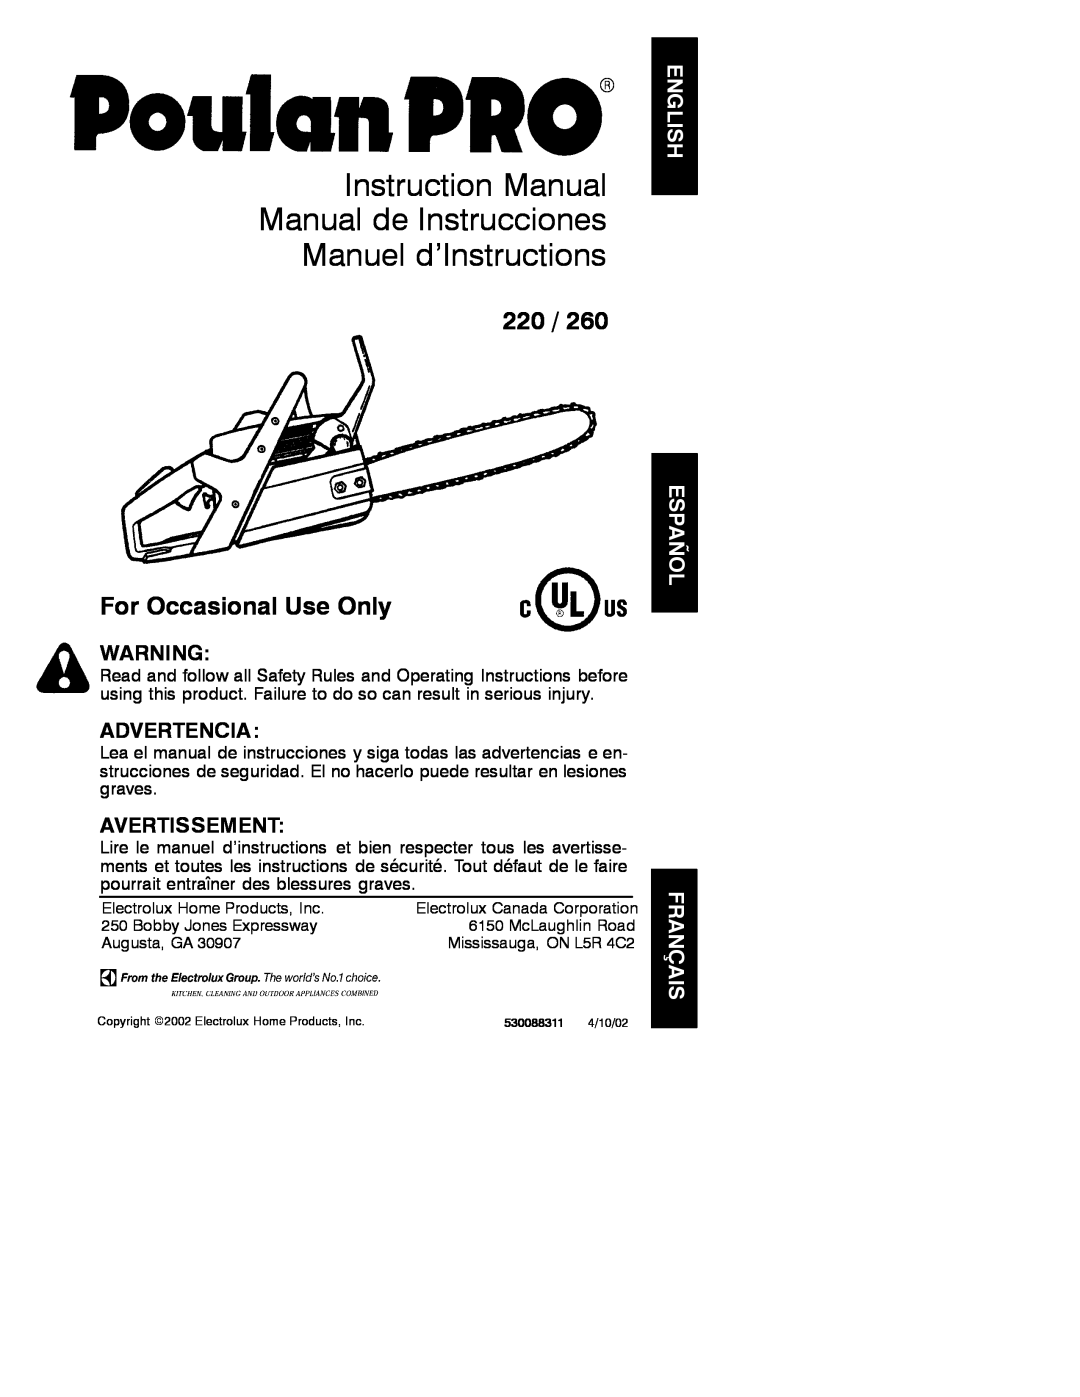 Poulan 530088311 instruction manual For Occasional Use Only, Advertencia, Avertissement 